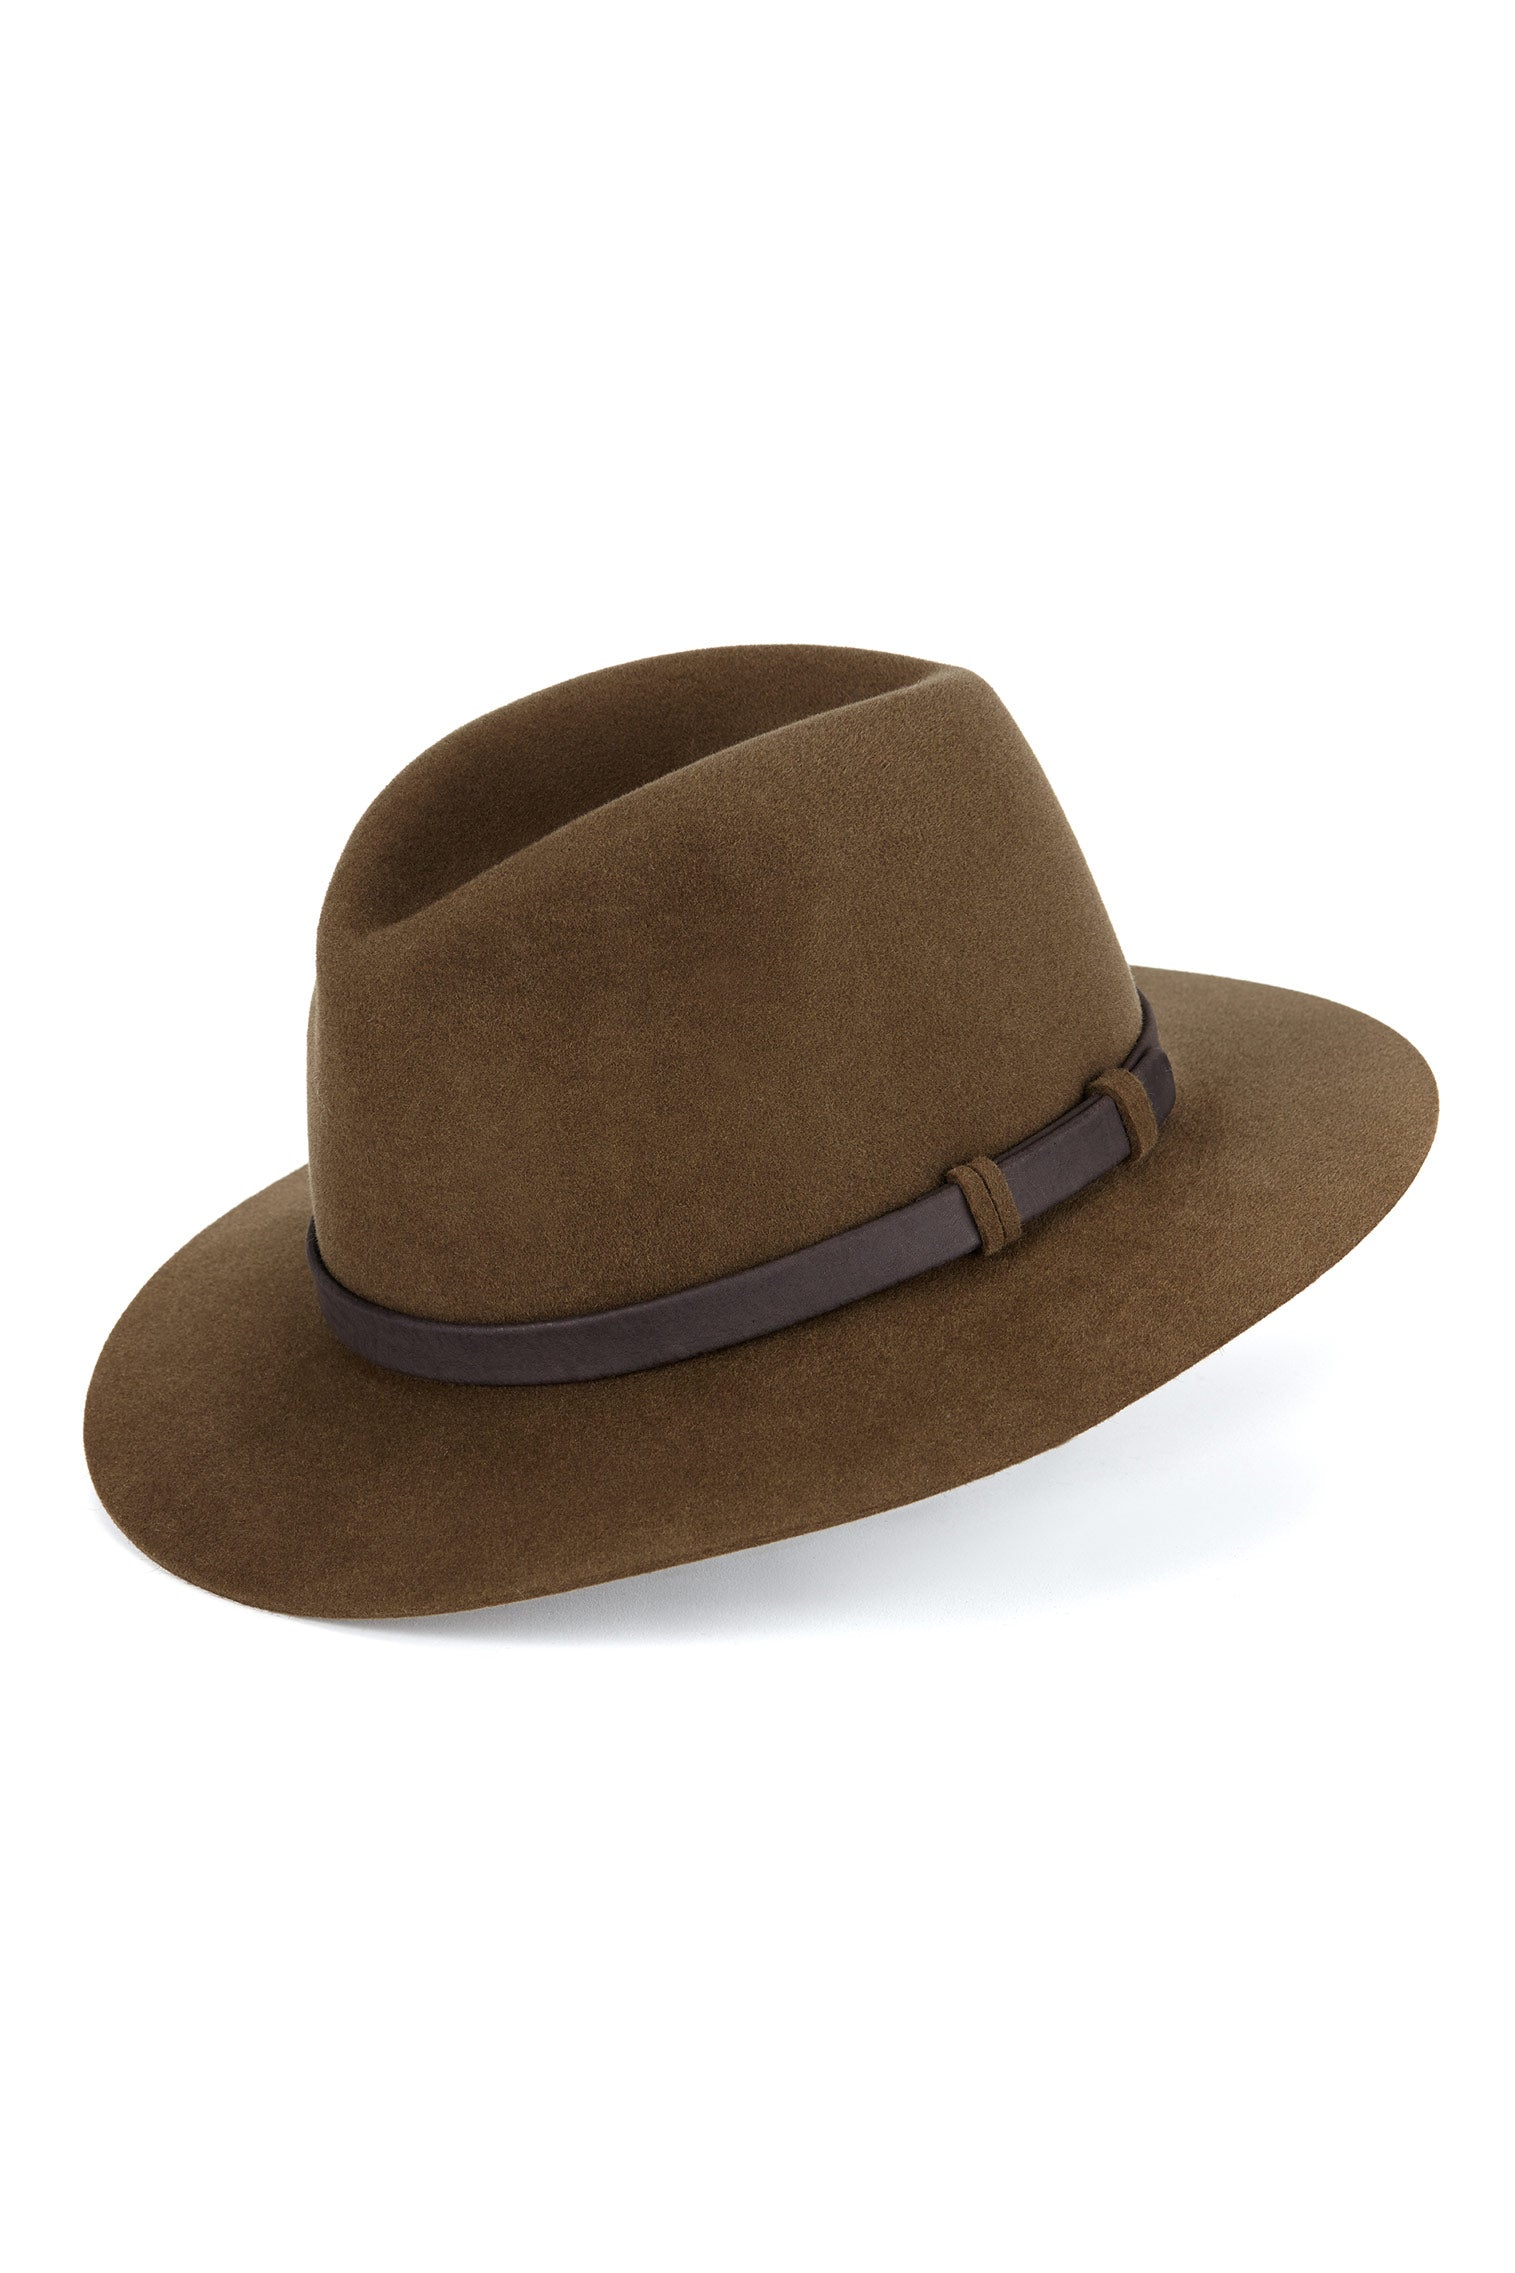 Chepstow Trilby - Hats for Heart-shaped Face Shapes - Lock & Co. Hatters London UK